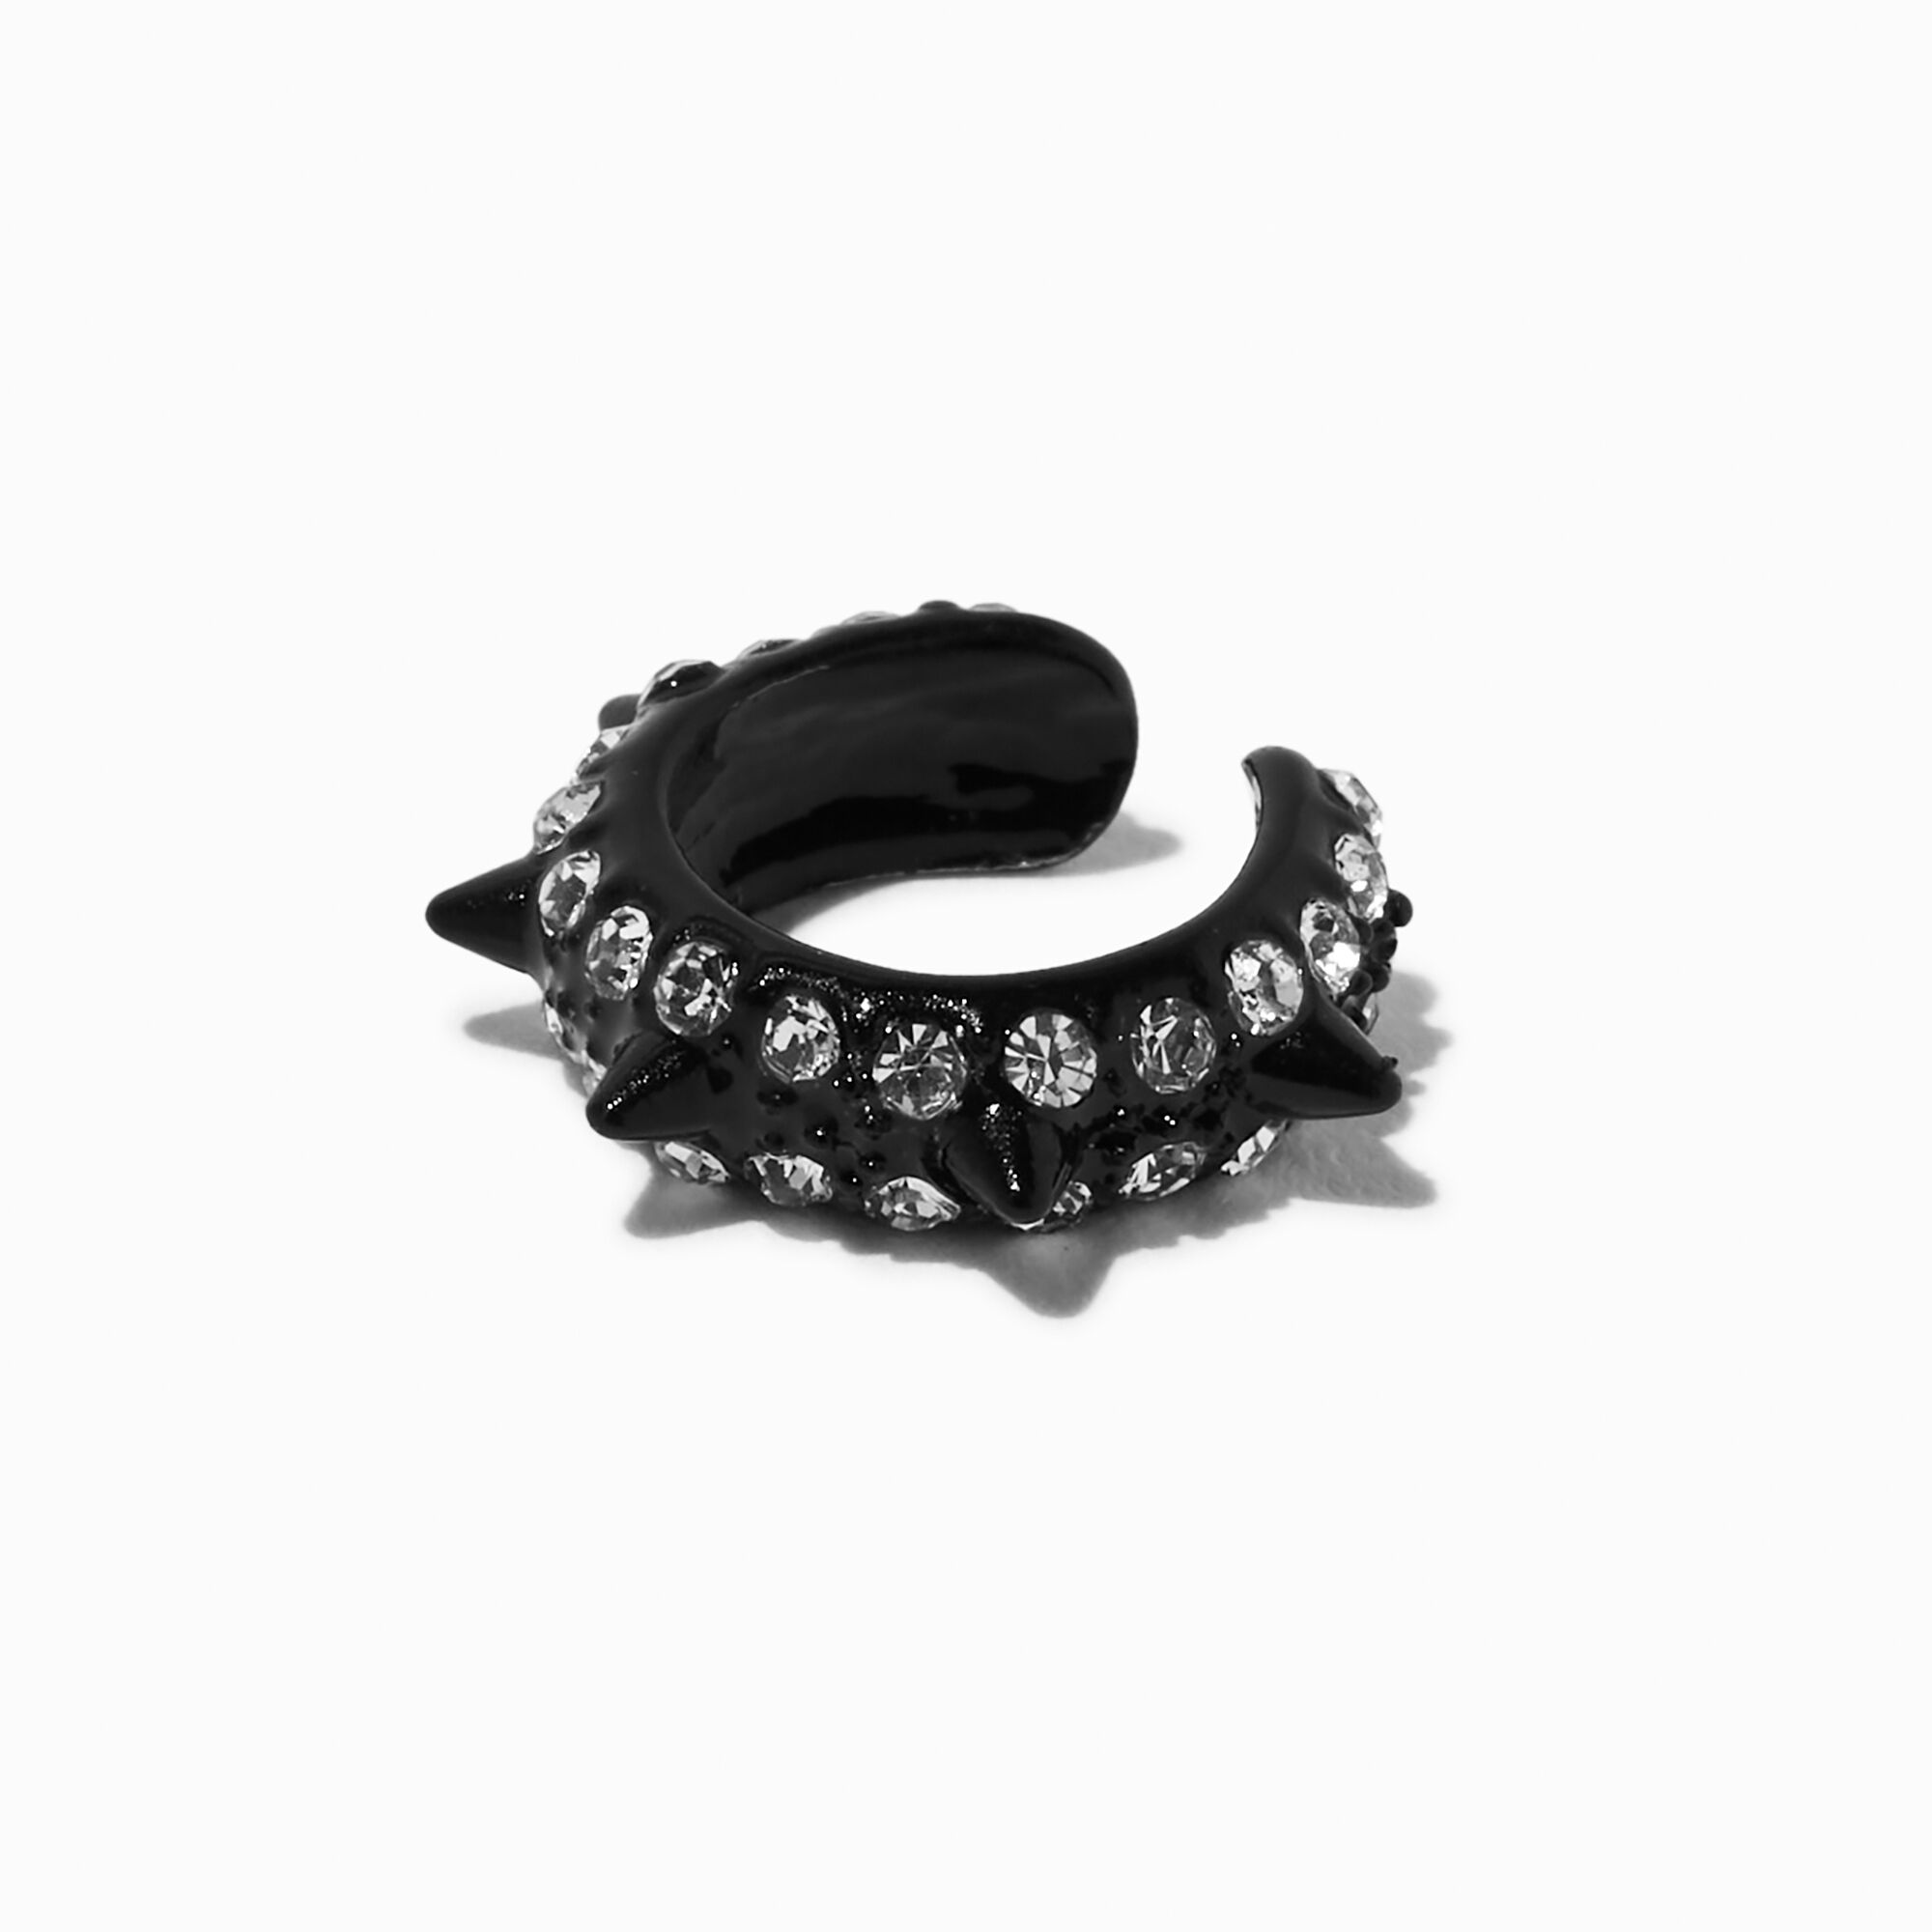 View Claires Spike Crystal Ear Cuff Black information